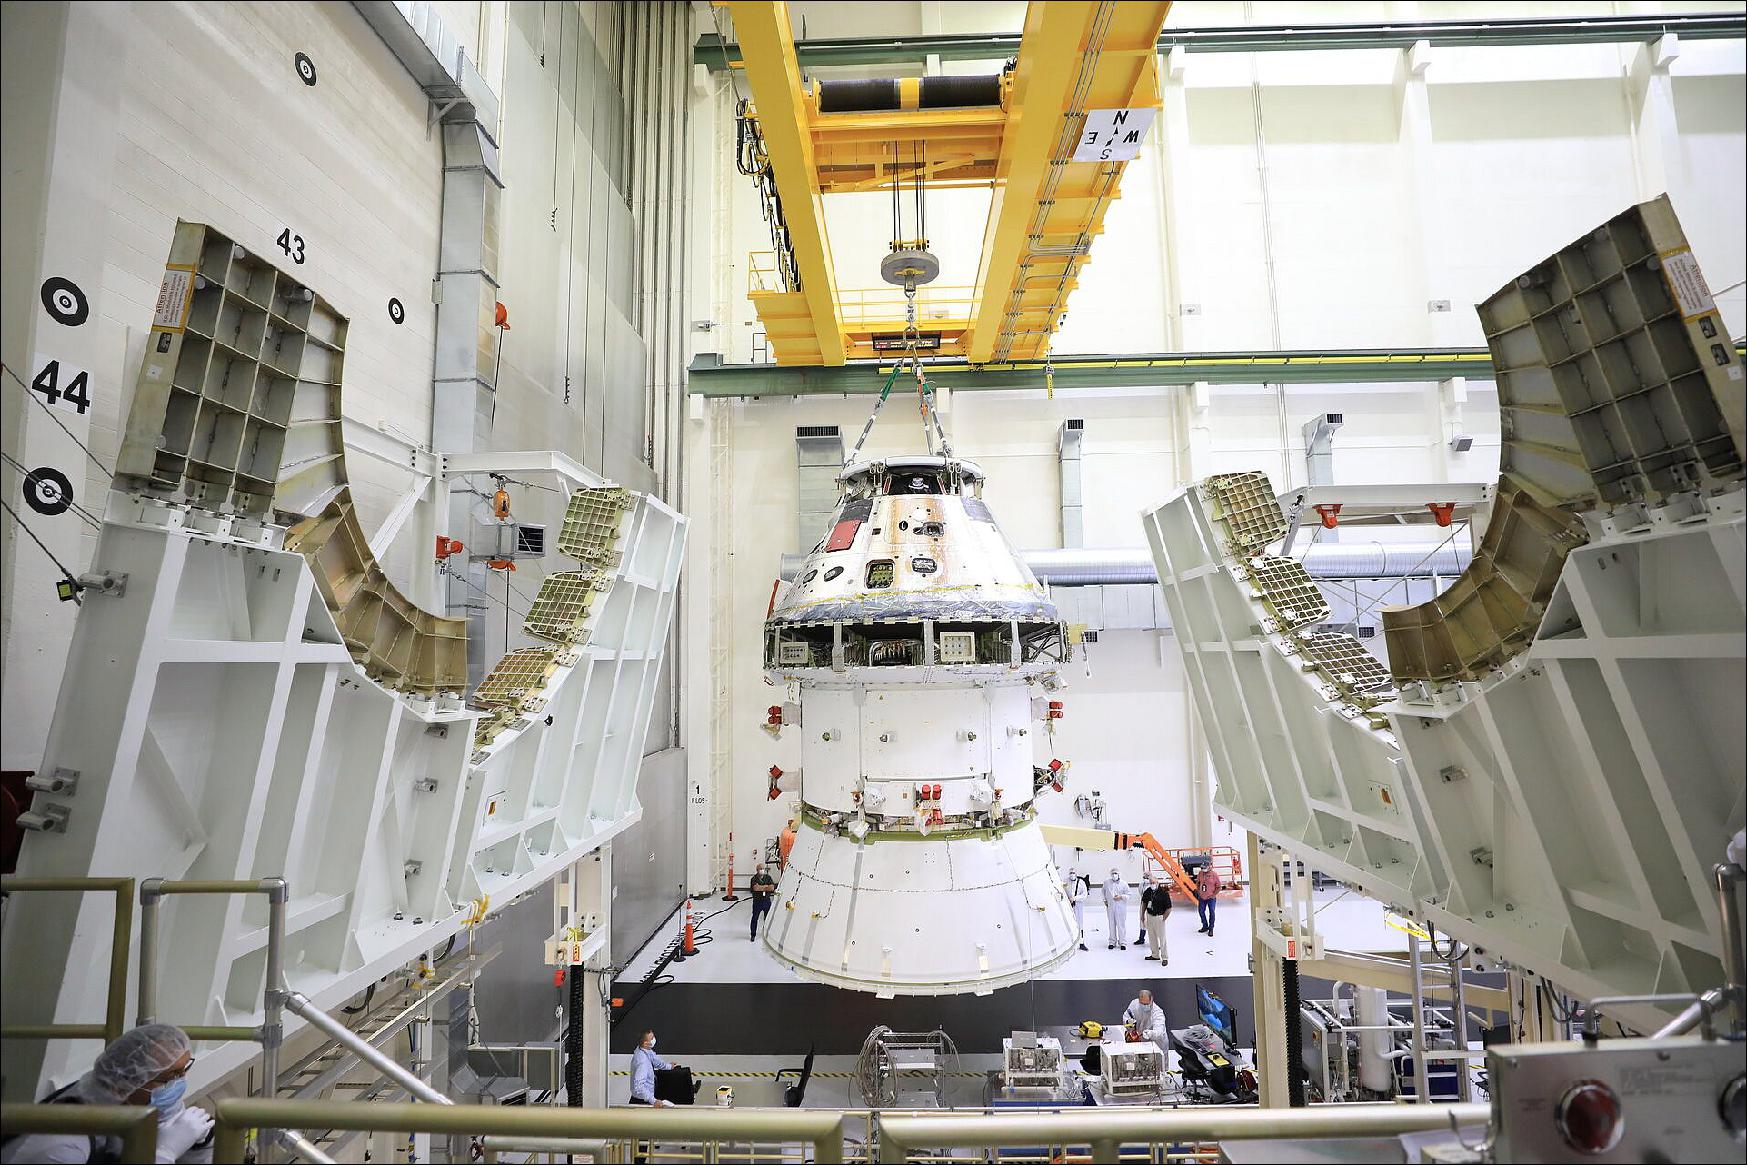 Figure 37: There it is – the first Orion spacecraft to travel to the Moon is seen here in the Neil Armstrong Operations and Checkout facility at NASA’s Kennedy Space Center in Florida, USA (image credit: NASA)